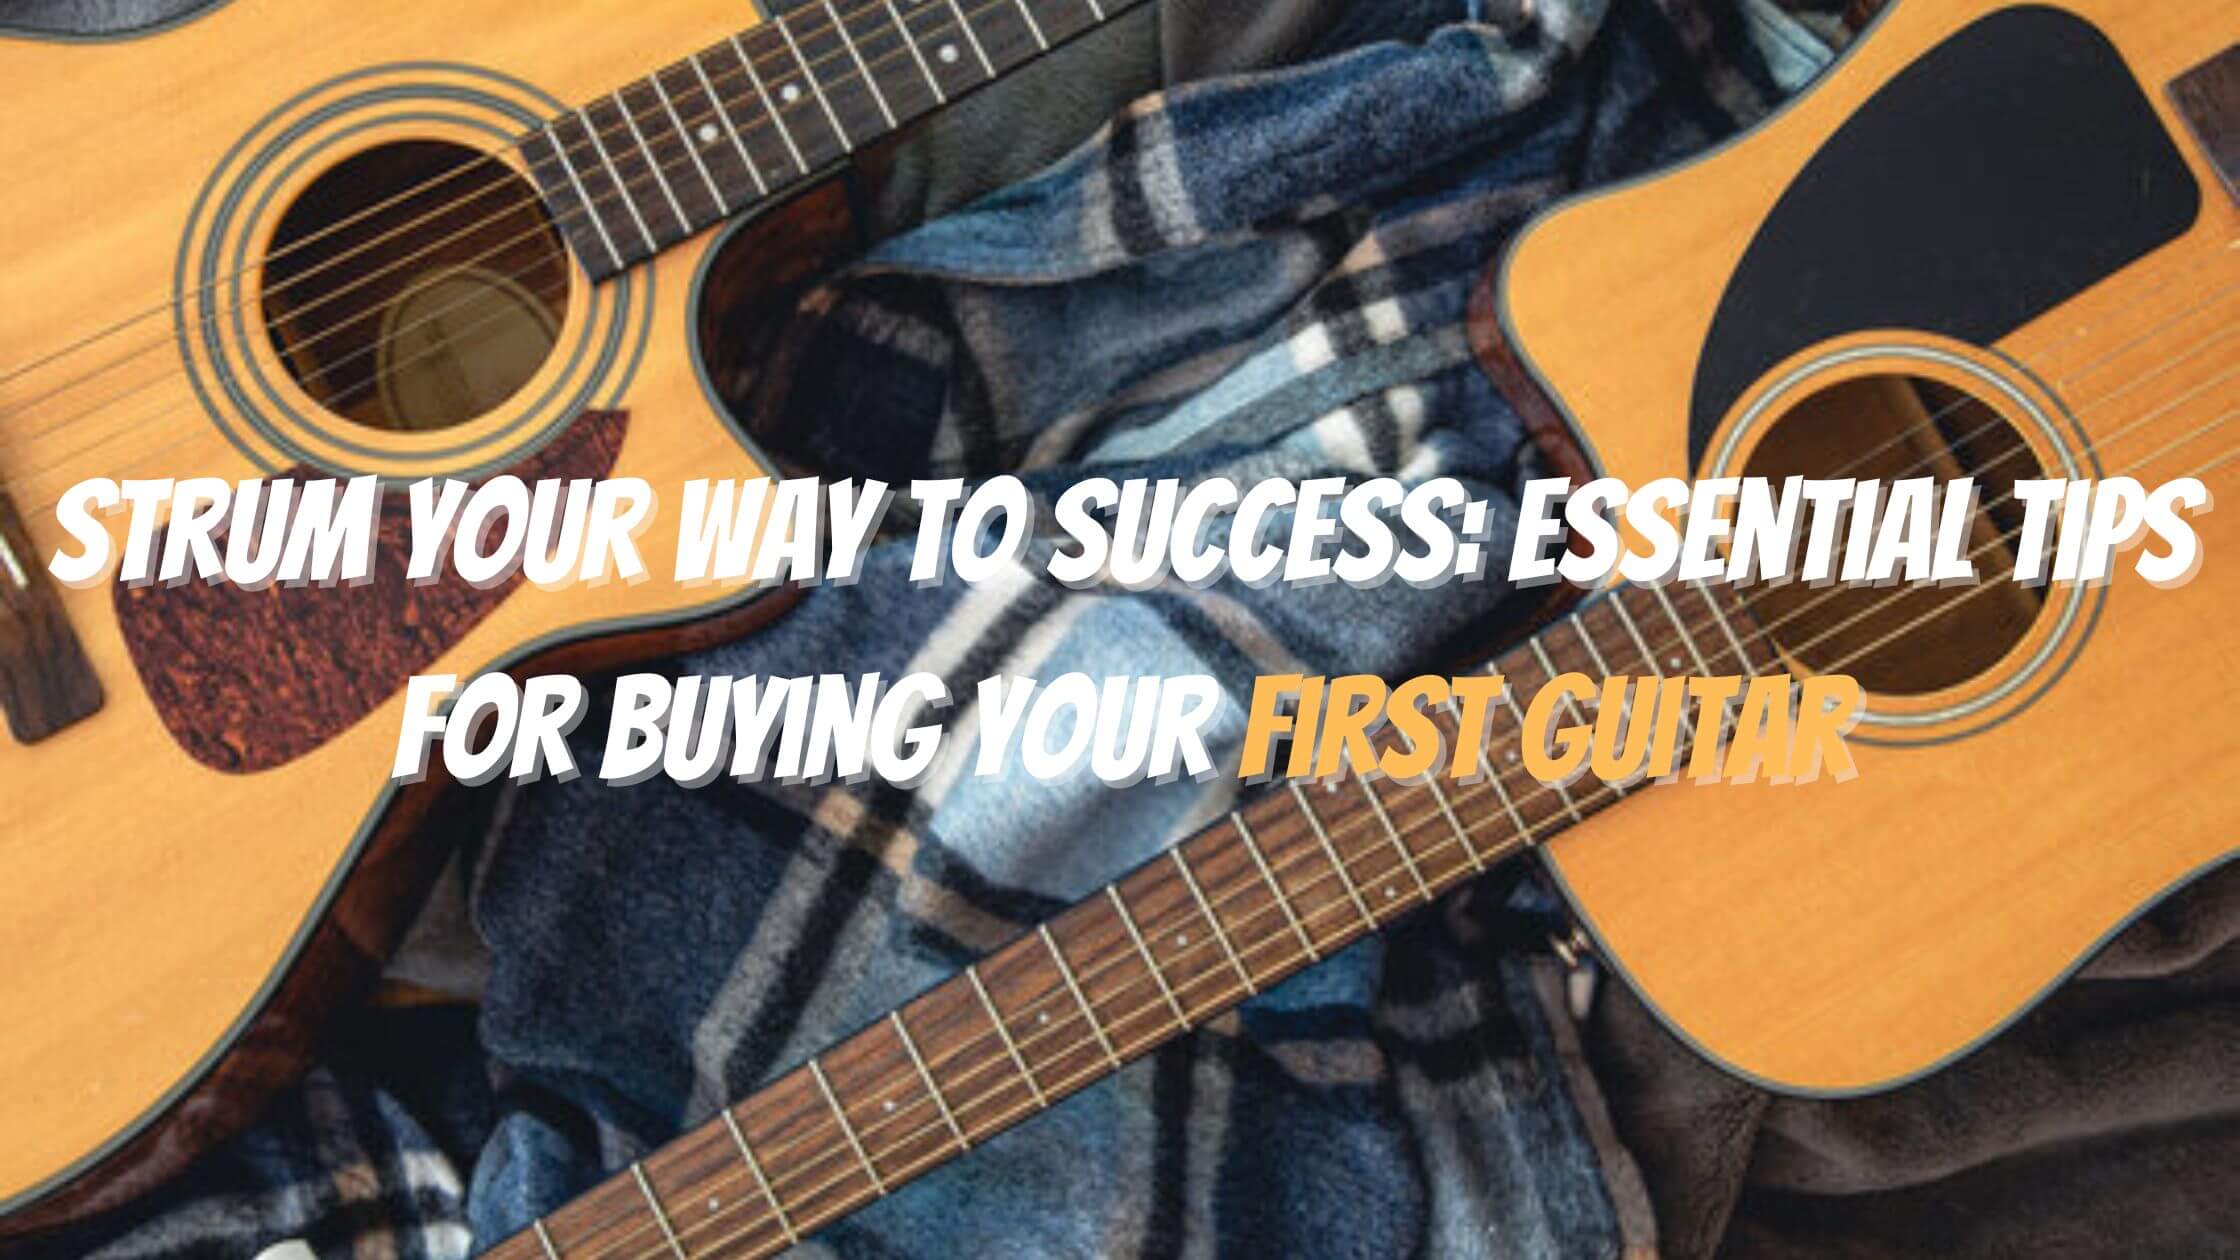 Best Acoustic Guitar Starter: Your Path to Strumming Success